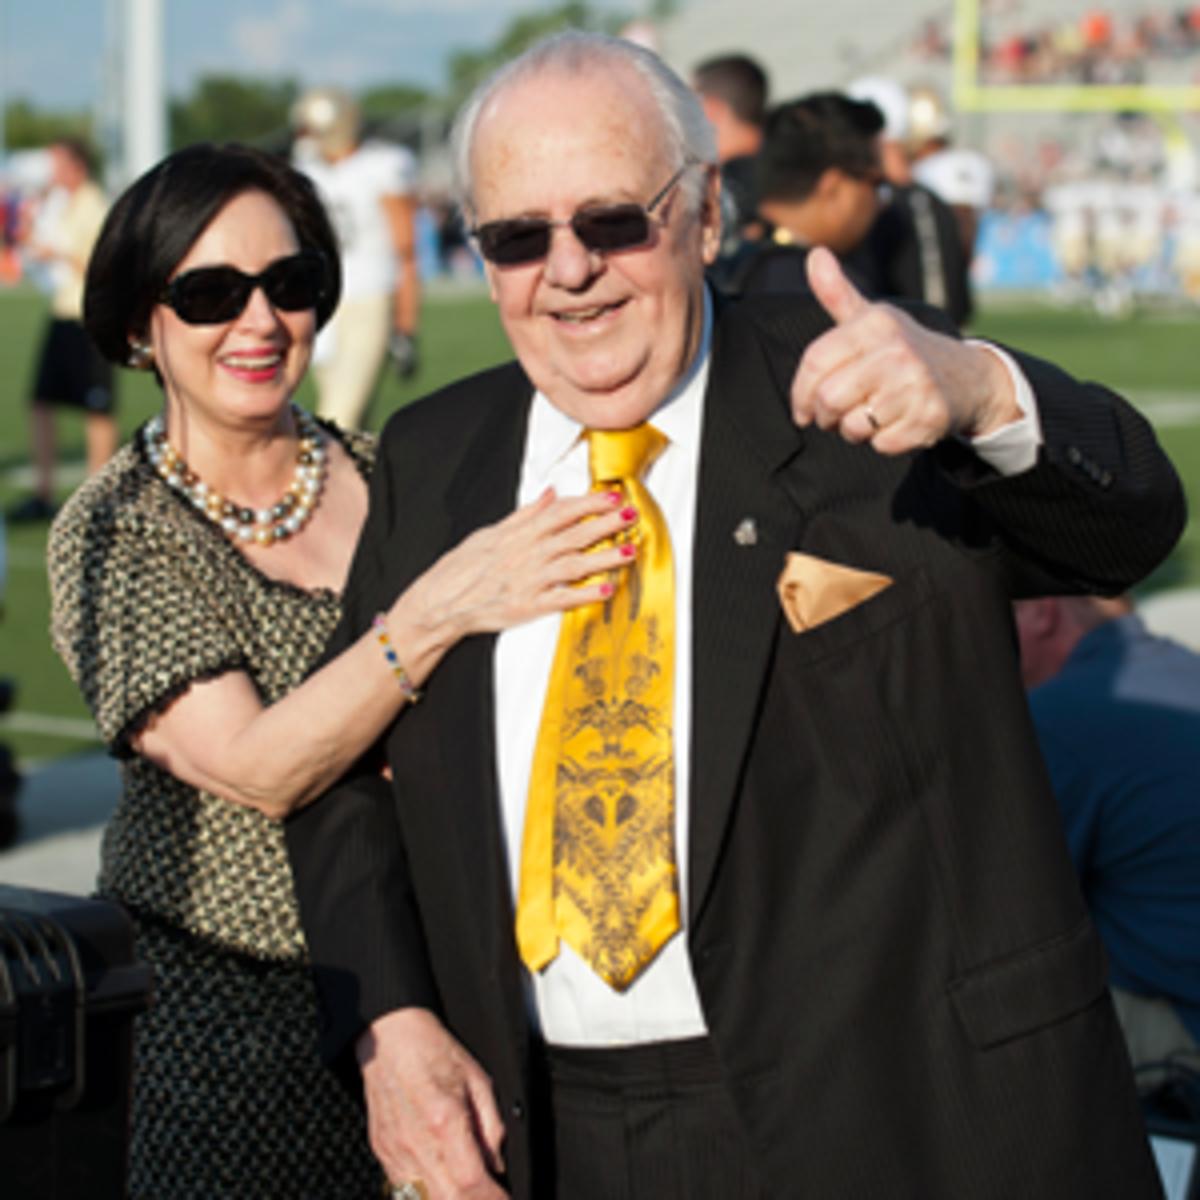 Saints owner Tom Benson and his wife, Gayle, at the Pro Football Hall of Fame game in 2012.